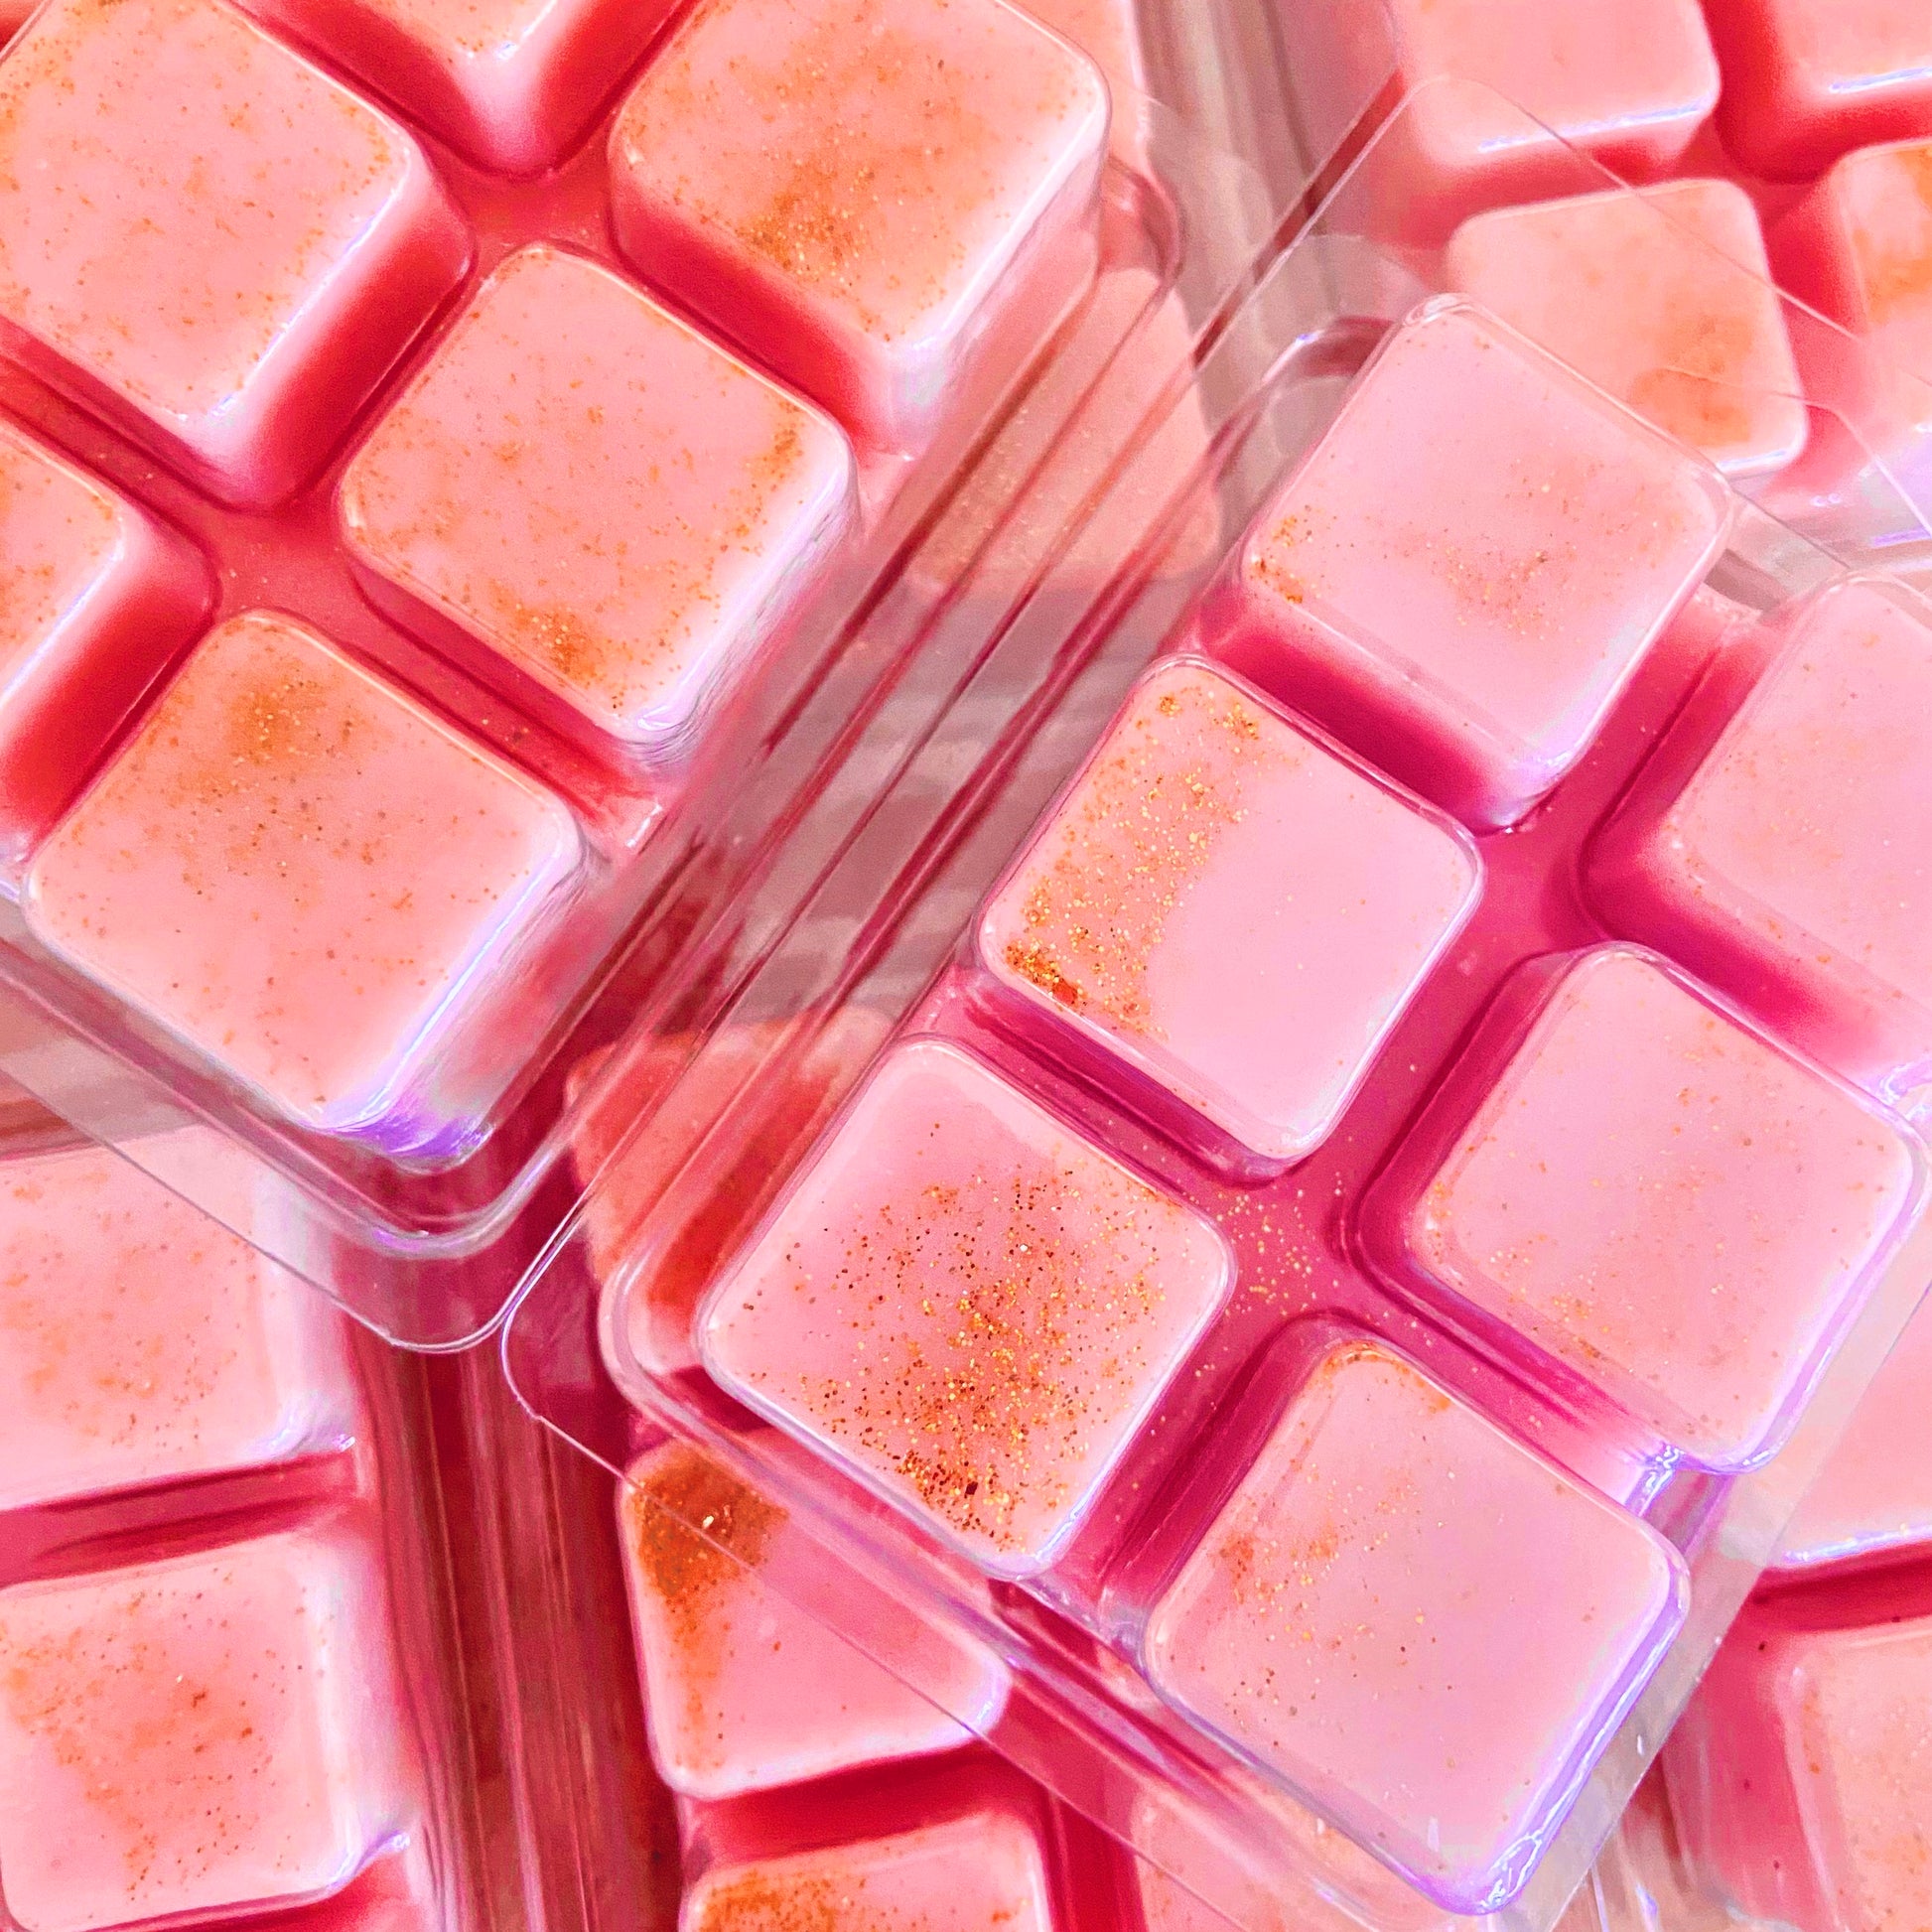 Pink glittery Sleepy Bedtime Baby Wax Melt Snap Bar in clear plastic packaging by The Soap Gals.